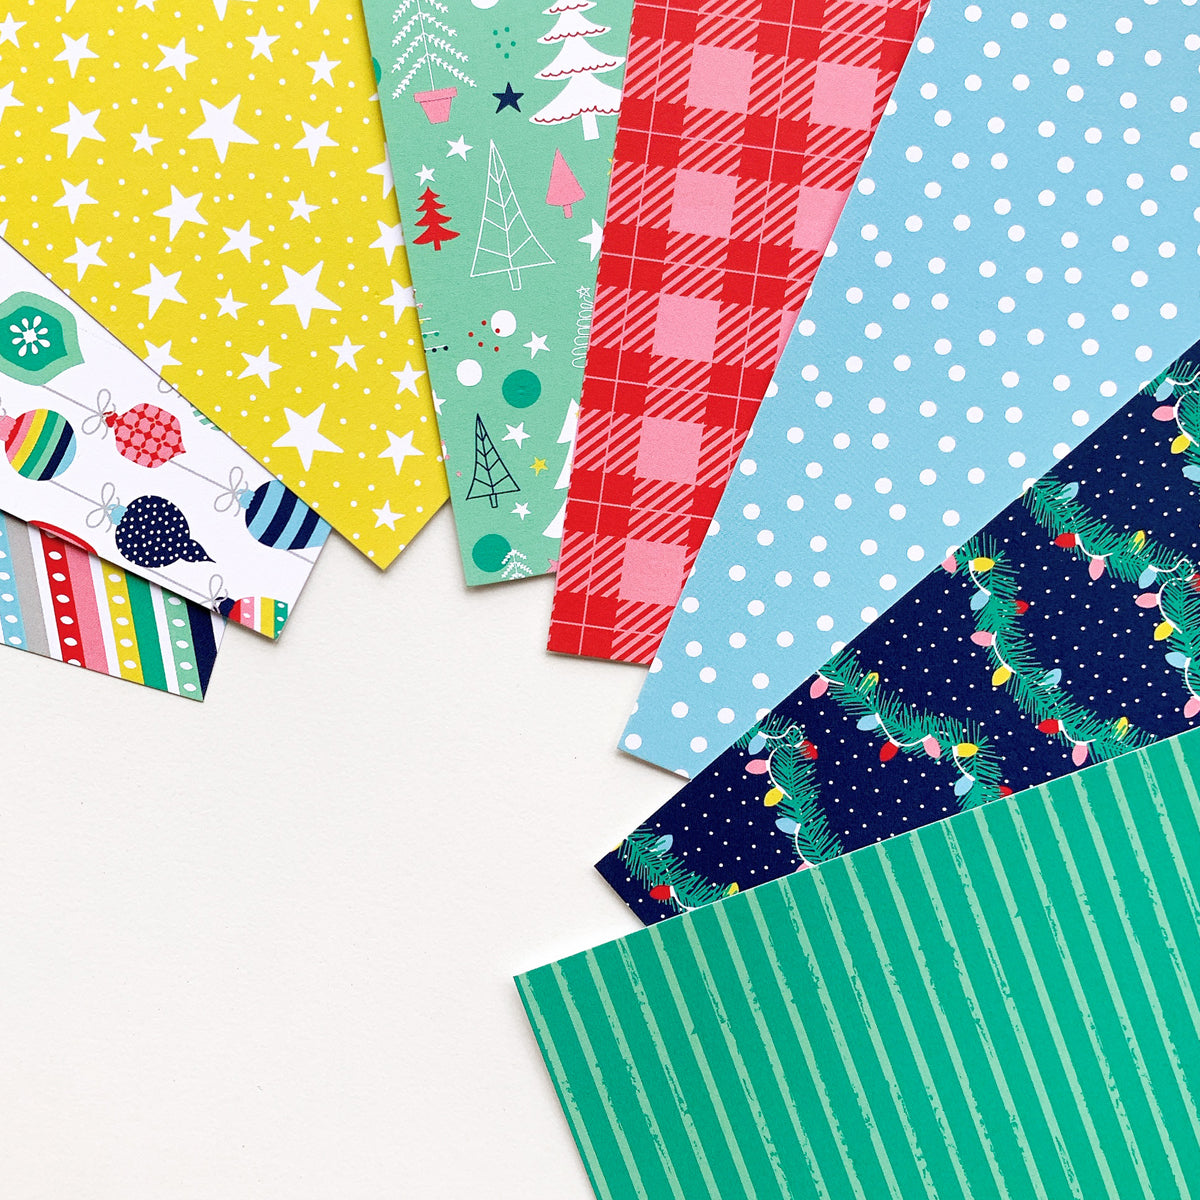 Catherine Pooler Designs Decked Out Holiday Patterned Paper